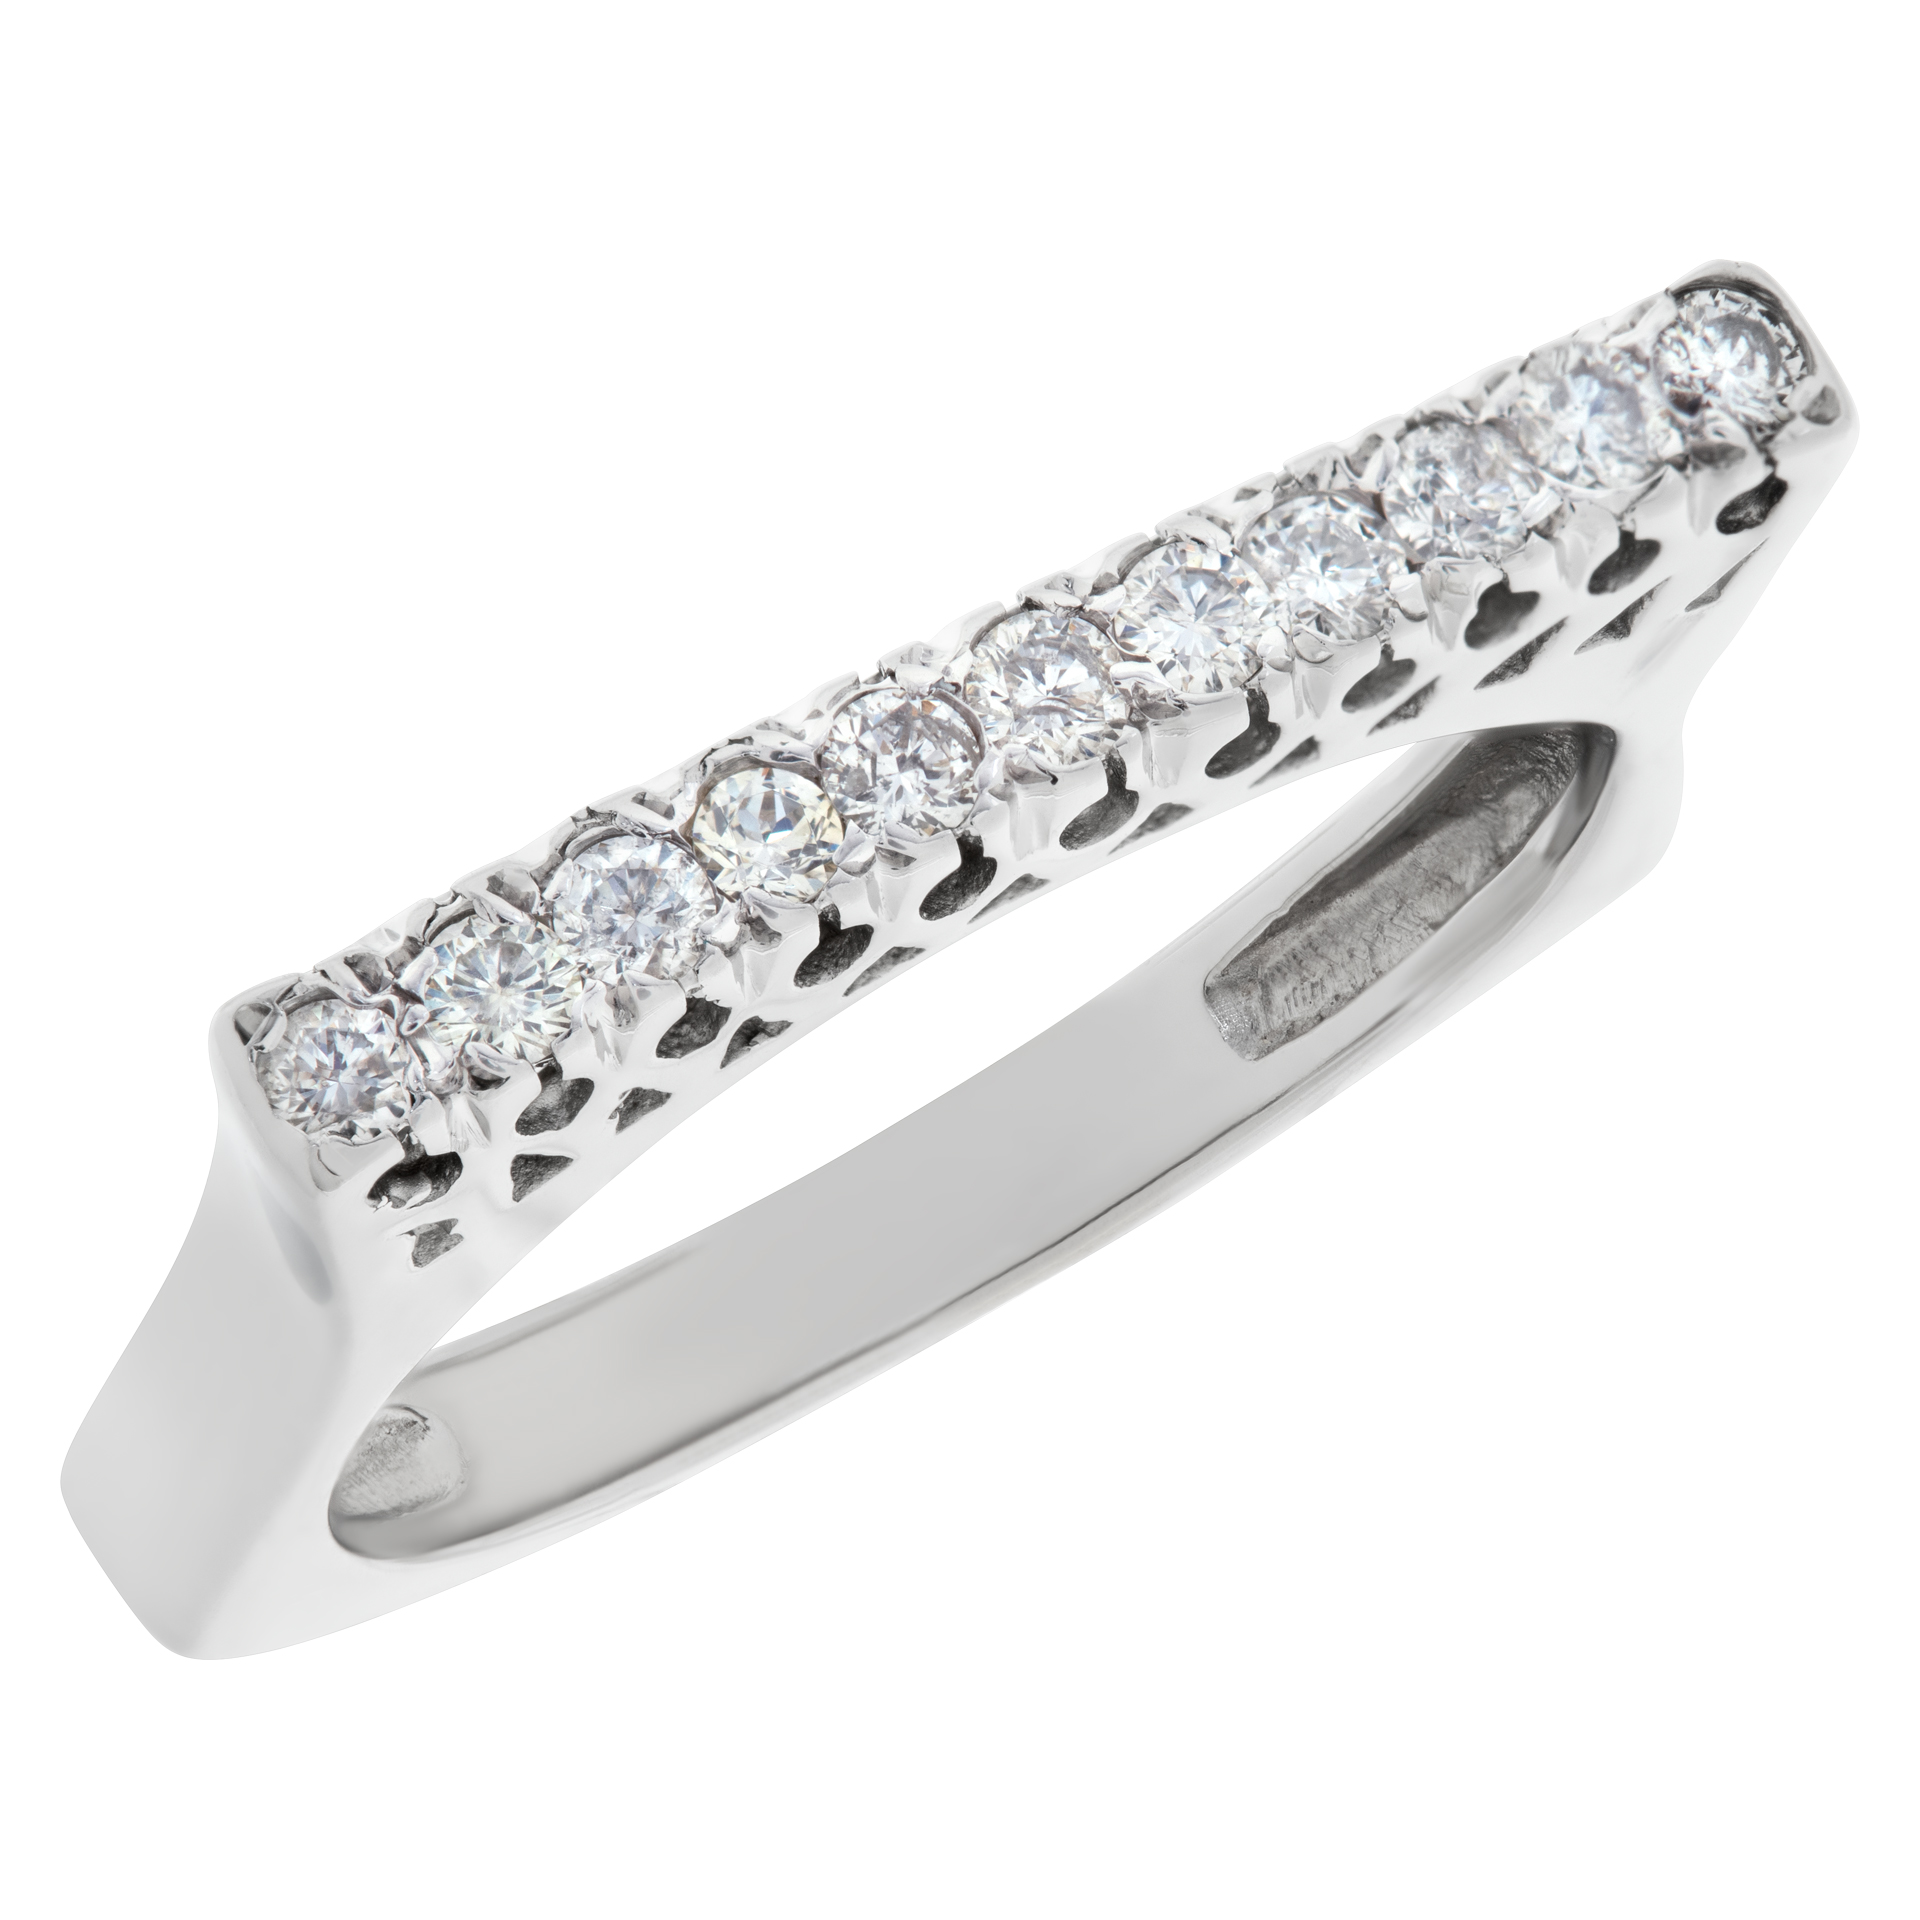 Single row diamond ring in 18k white gold. 0.33 carat (I-J color, SI1 clarity). Size 8 image 3